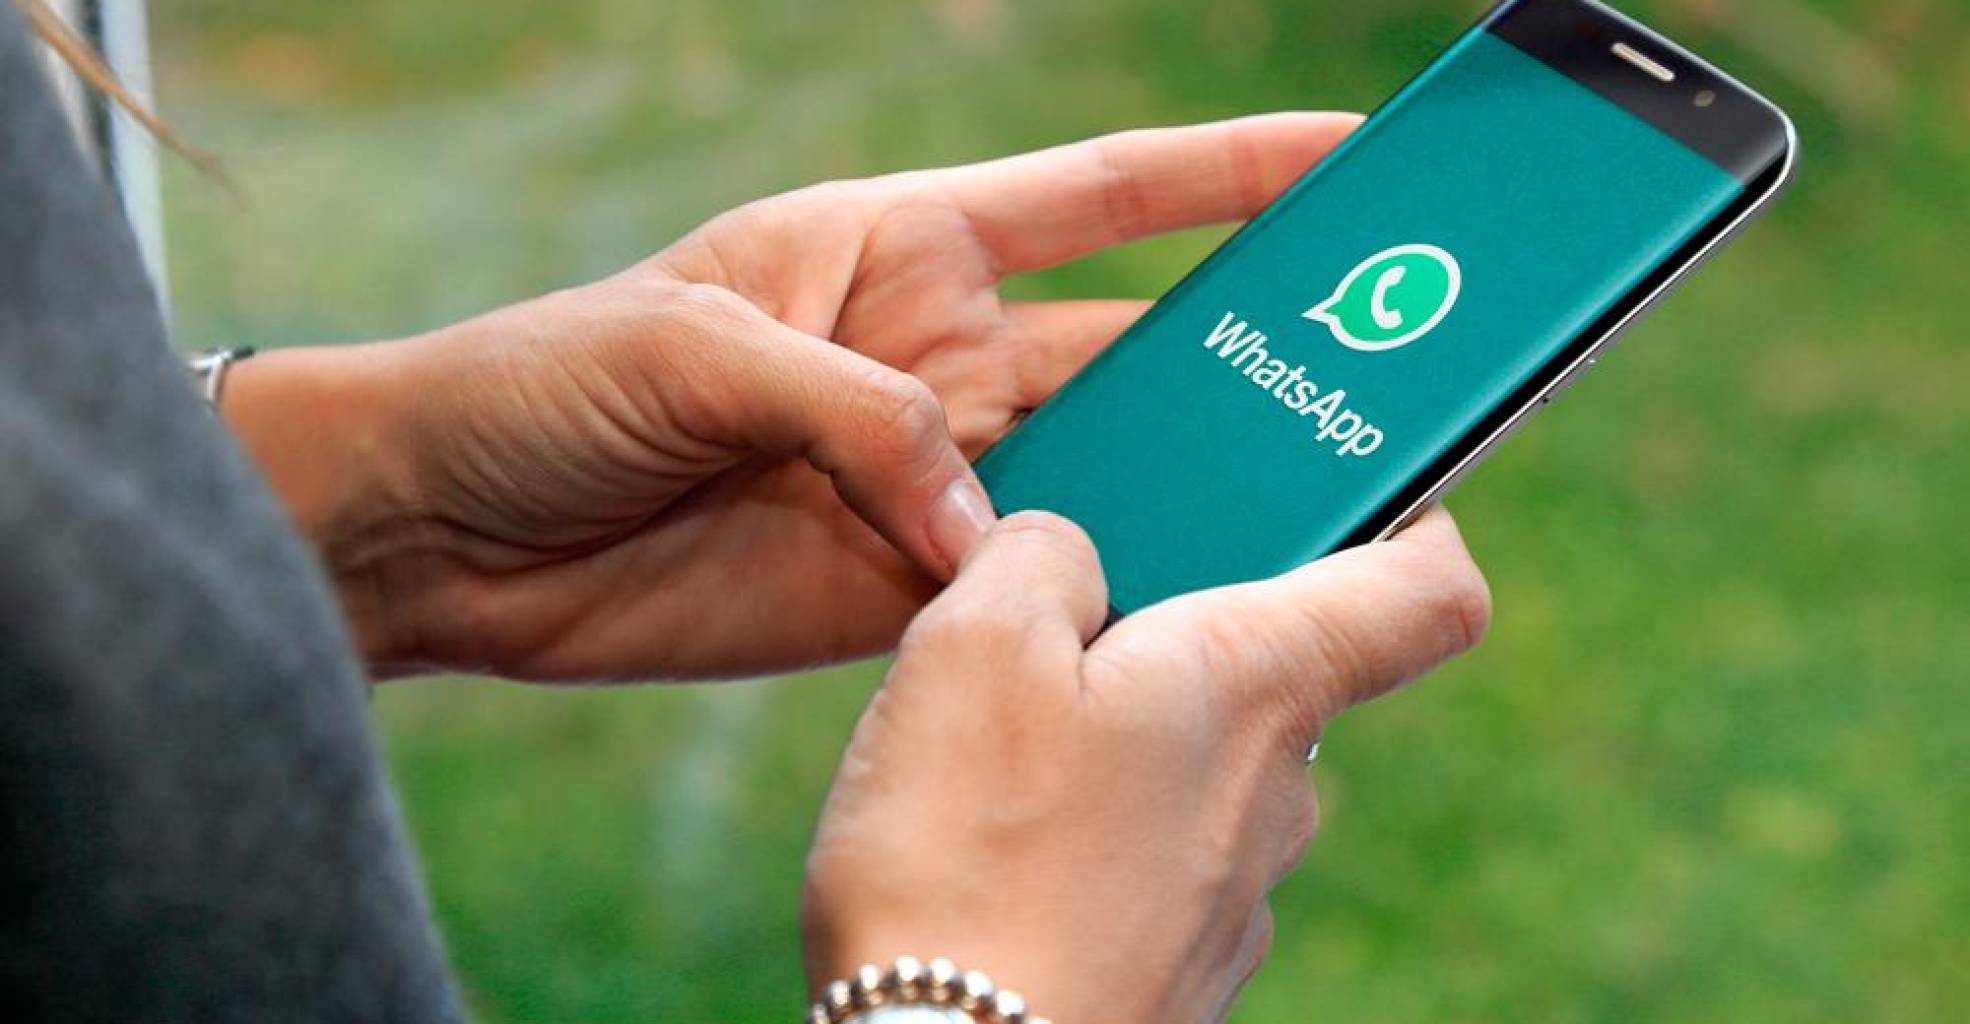 So you can change your WhatsApp number without losing chats or contacts